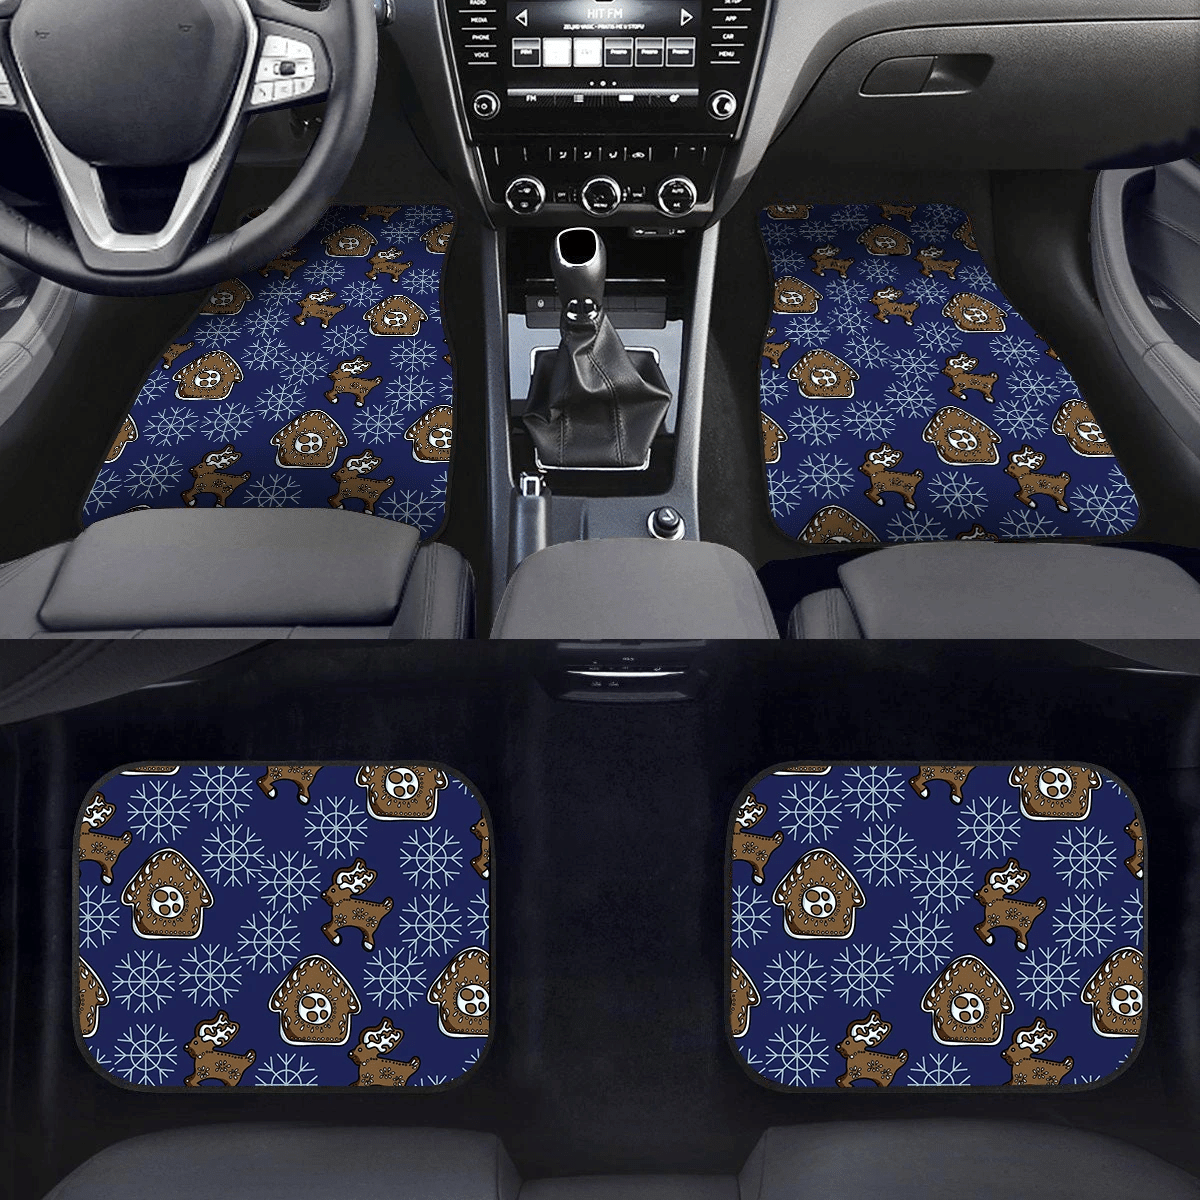 White Icing Ornate Snowflakes With Sweets Cookies Car Mats Car Floor Mats